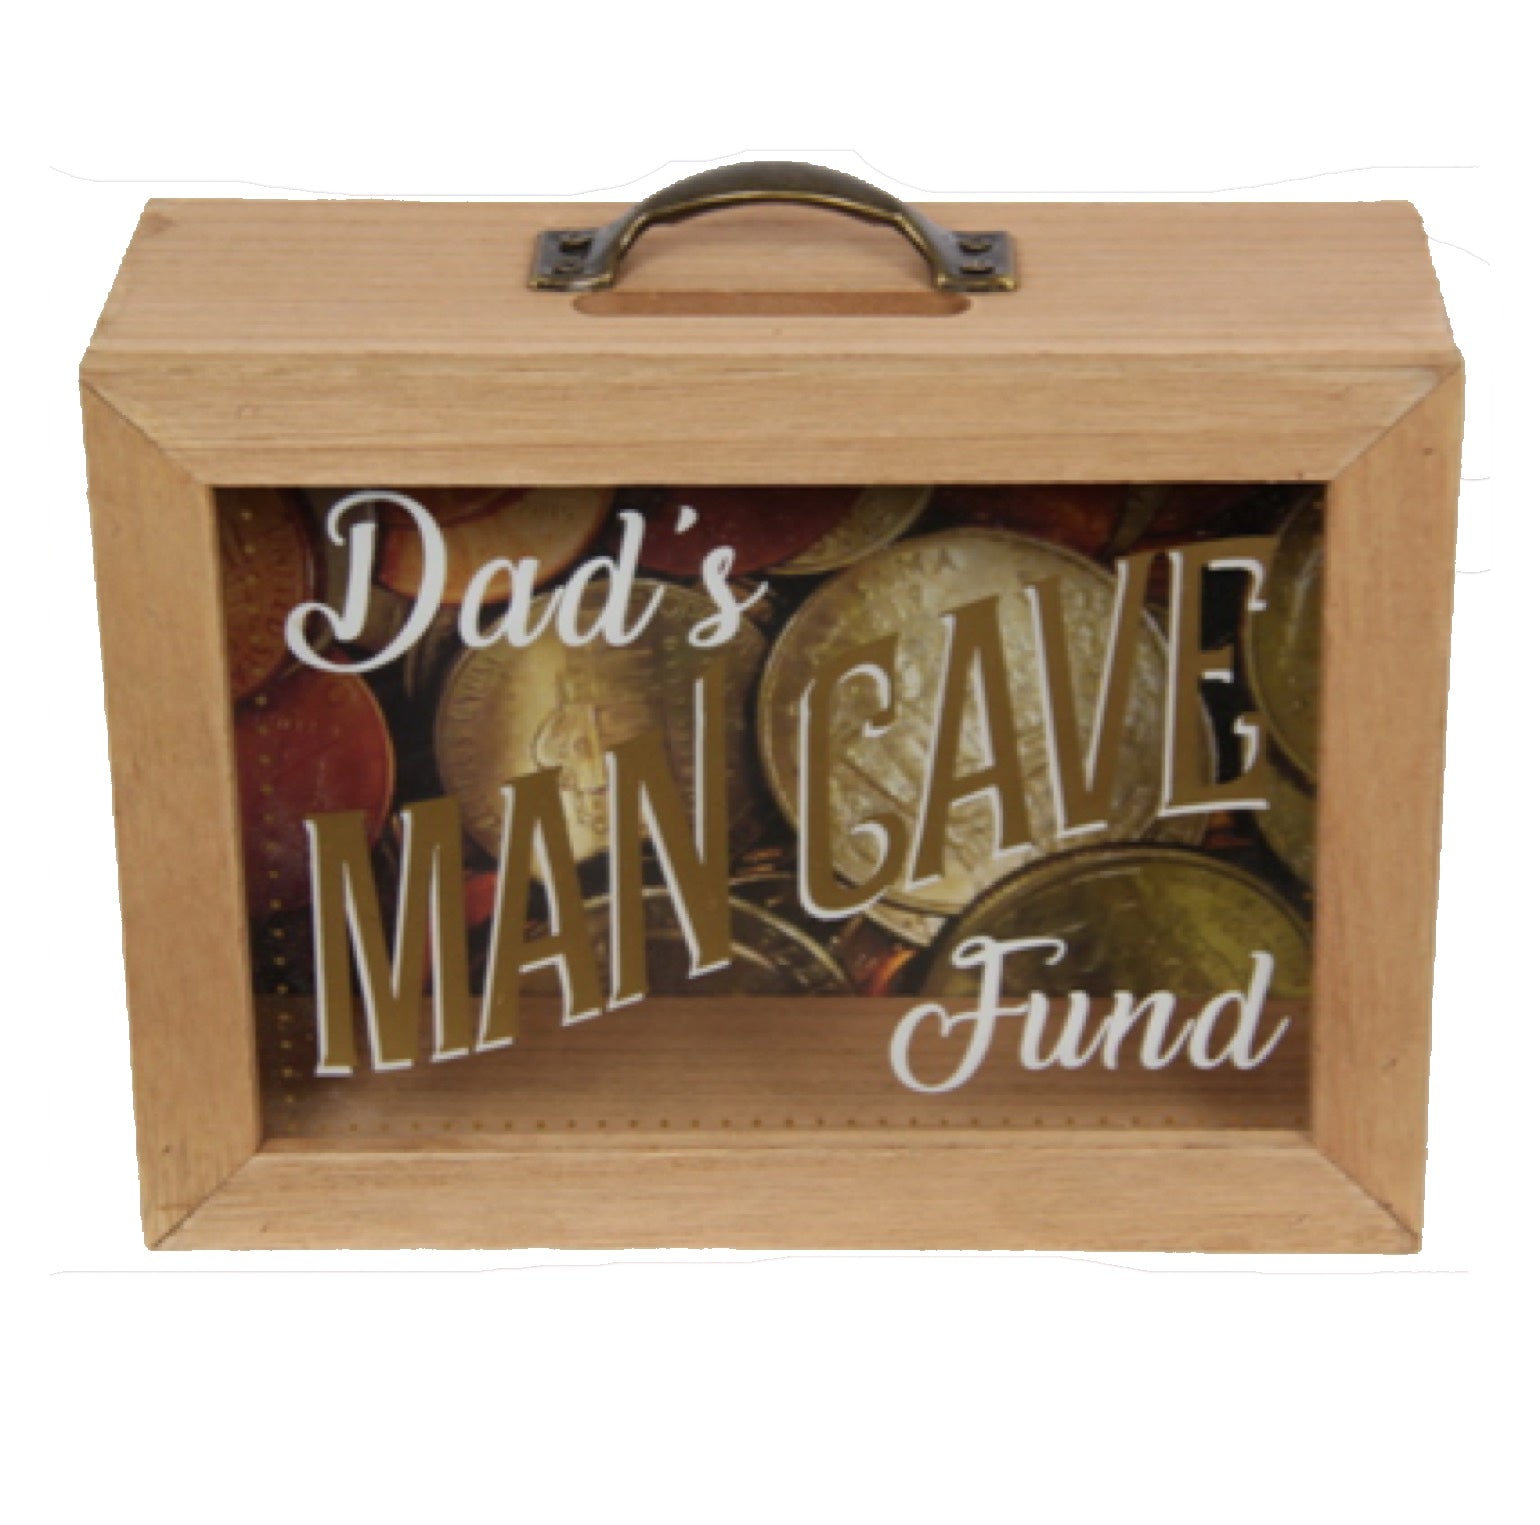 Money Box Dads Man Cave Fund Garage Rustic - The Renmy Store Homewares & Gifts 